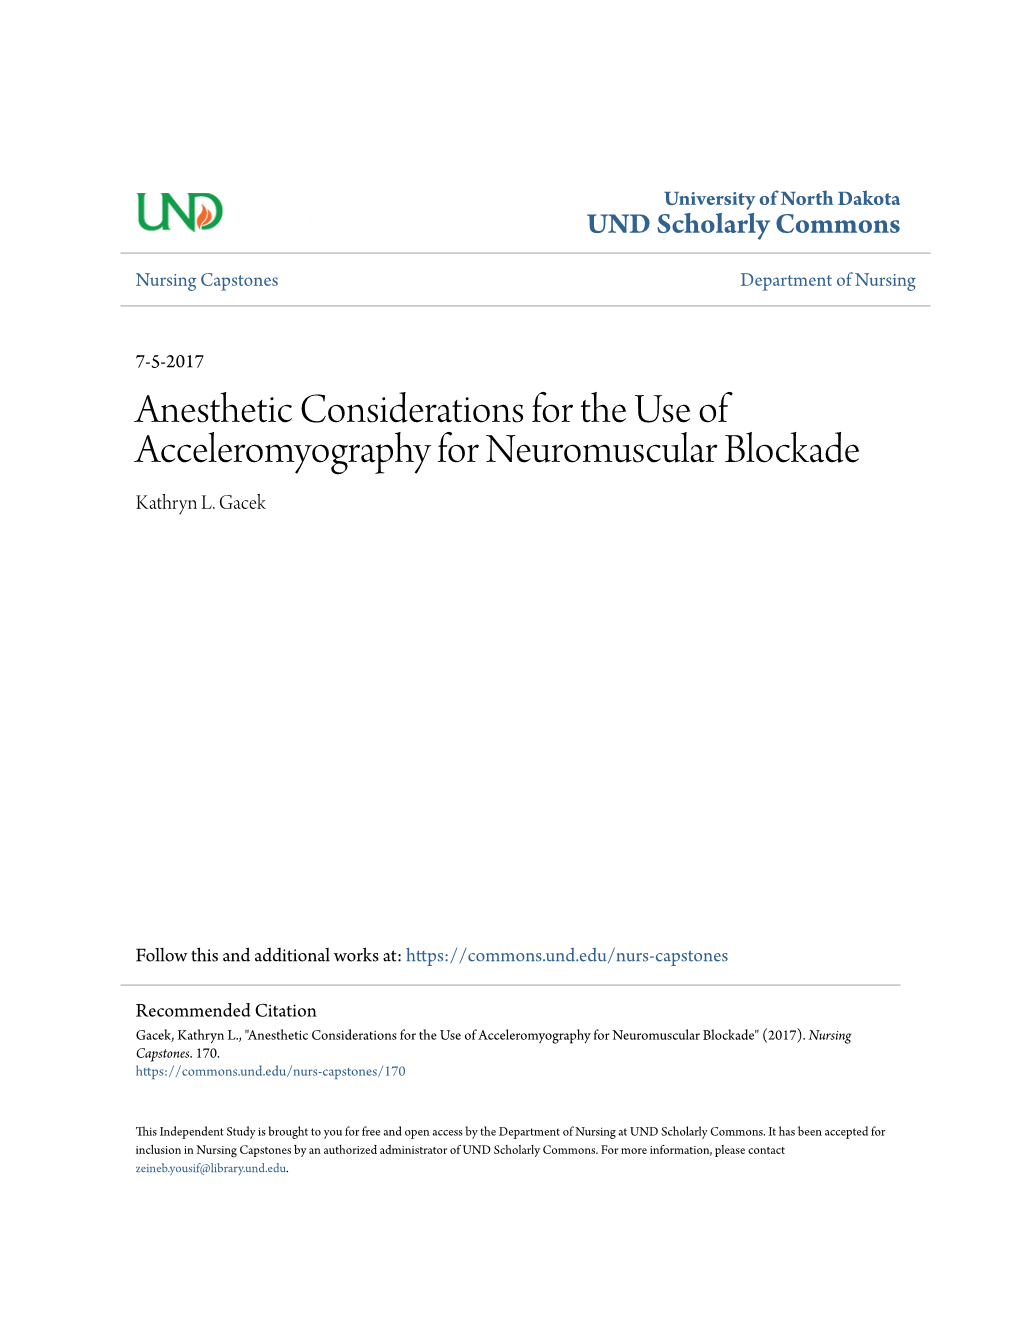 Anesthetic Considerations for the Use of Acceleromyography for Neuromuscular Blockade Kathryn L